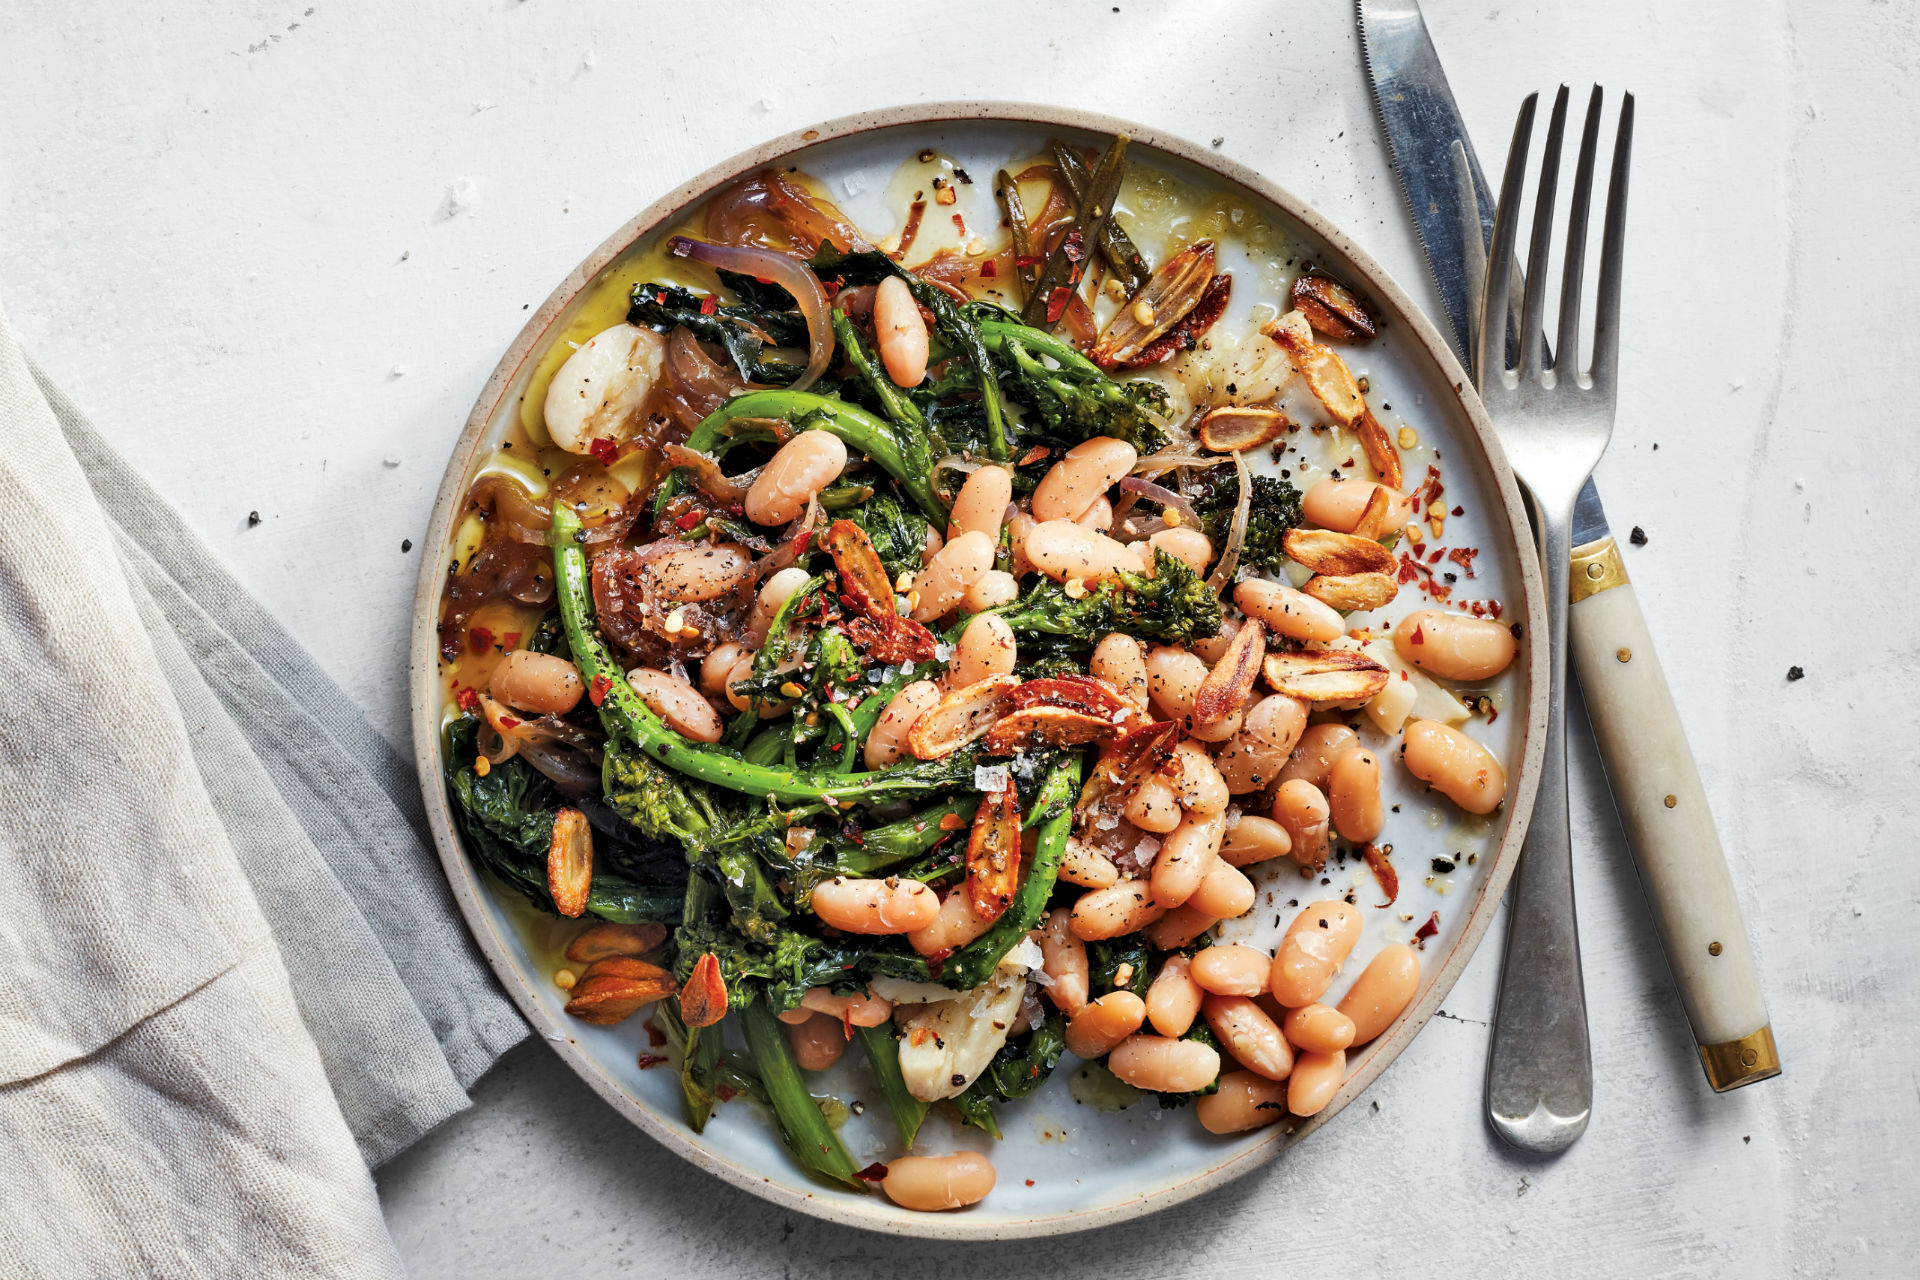 plate of beans and broccoli rabe